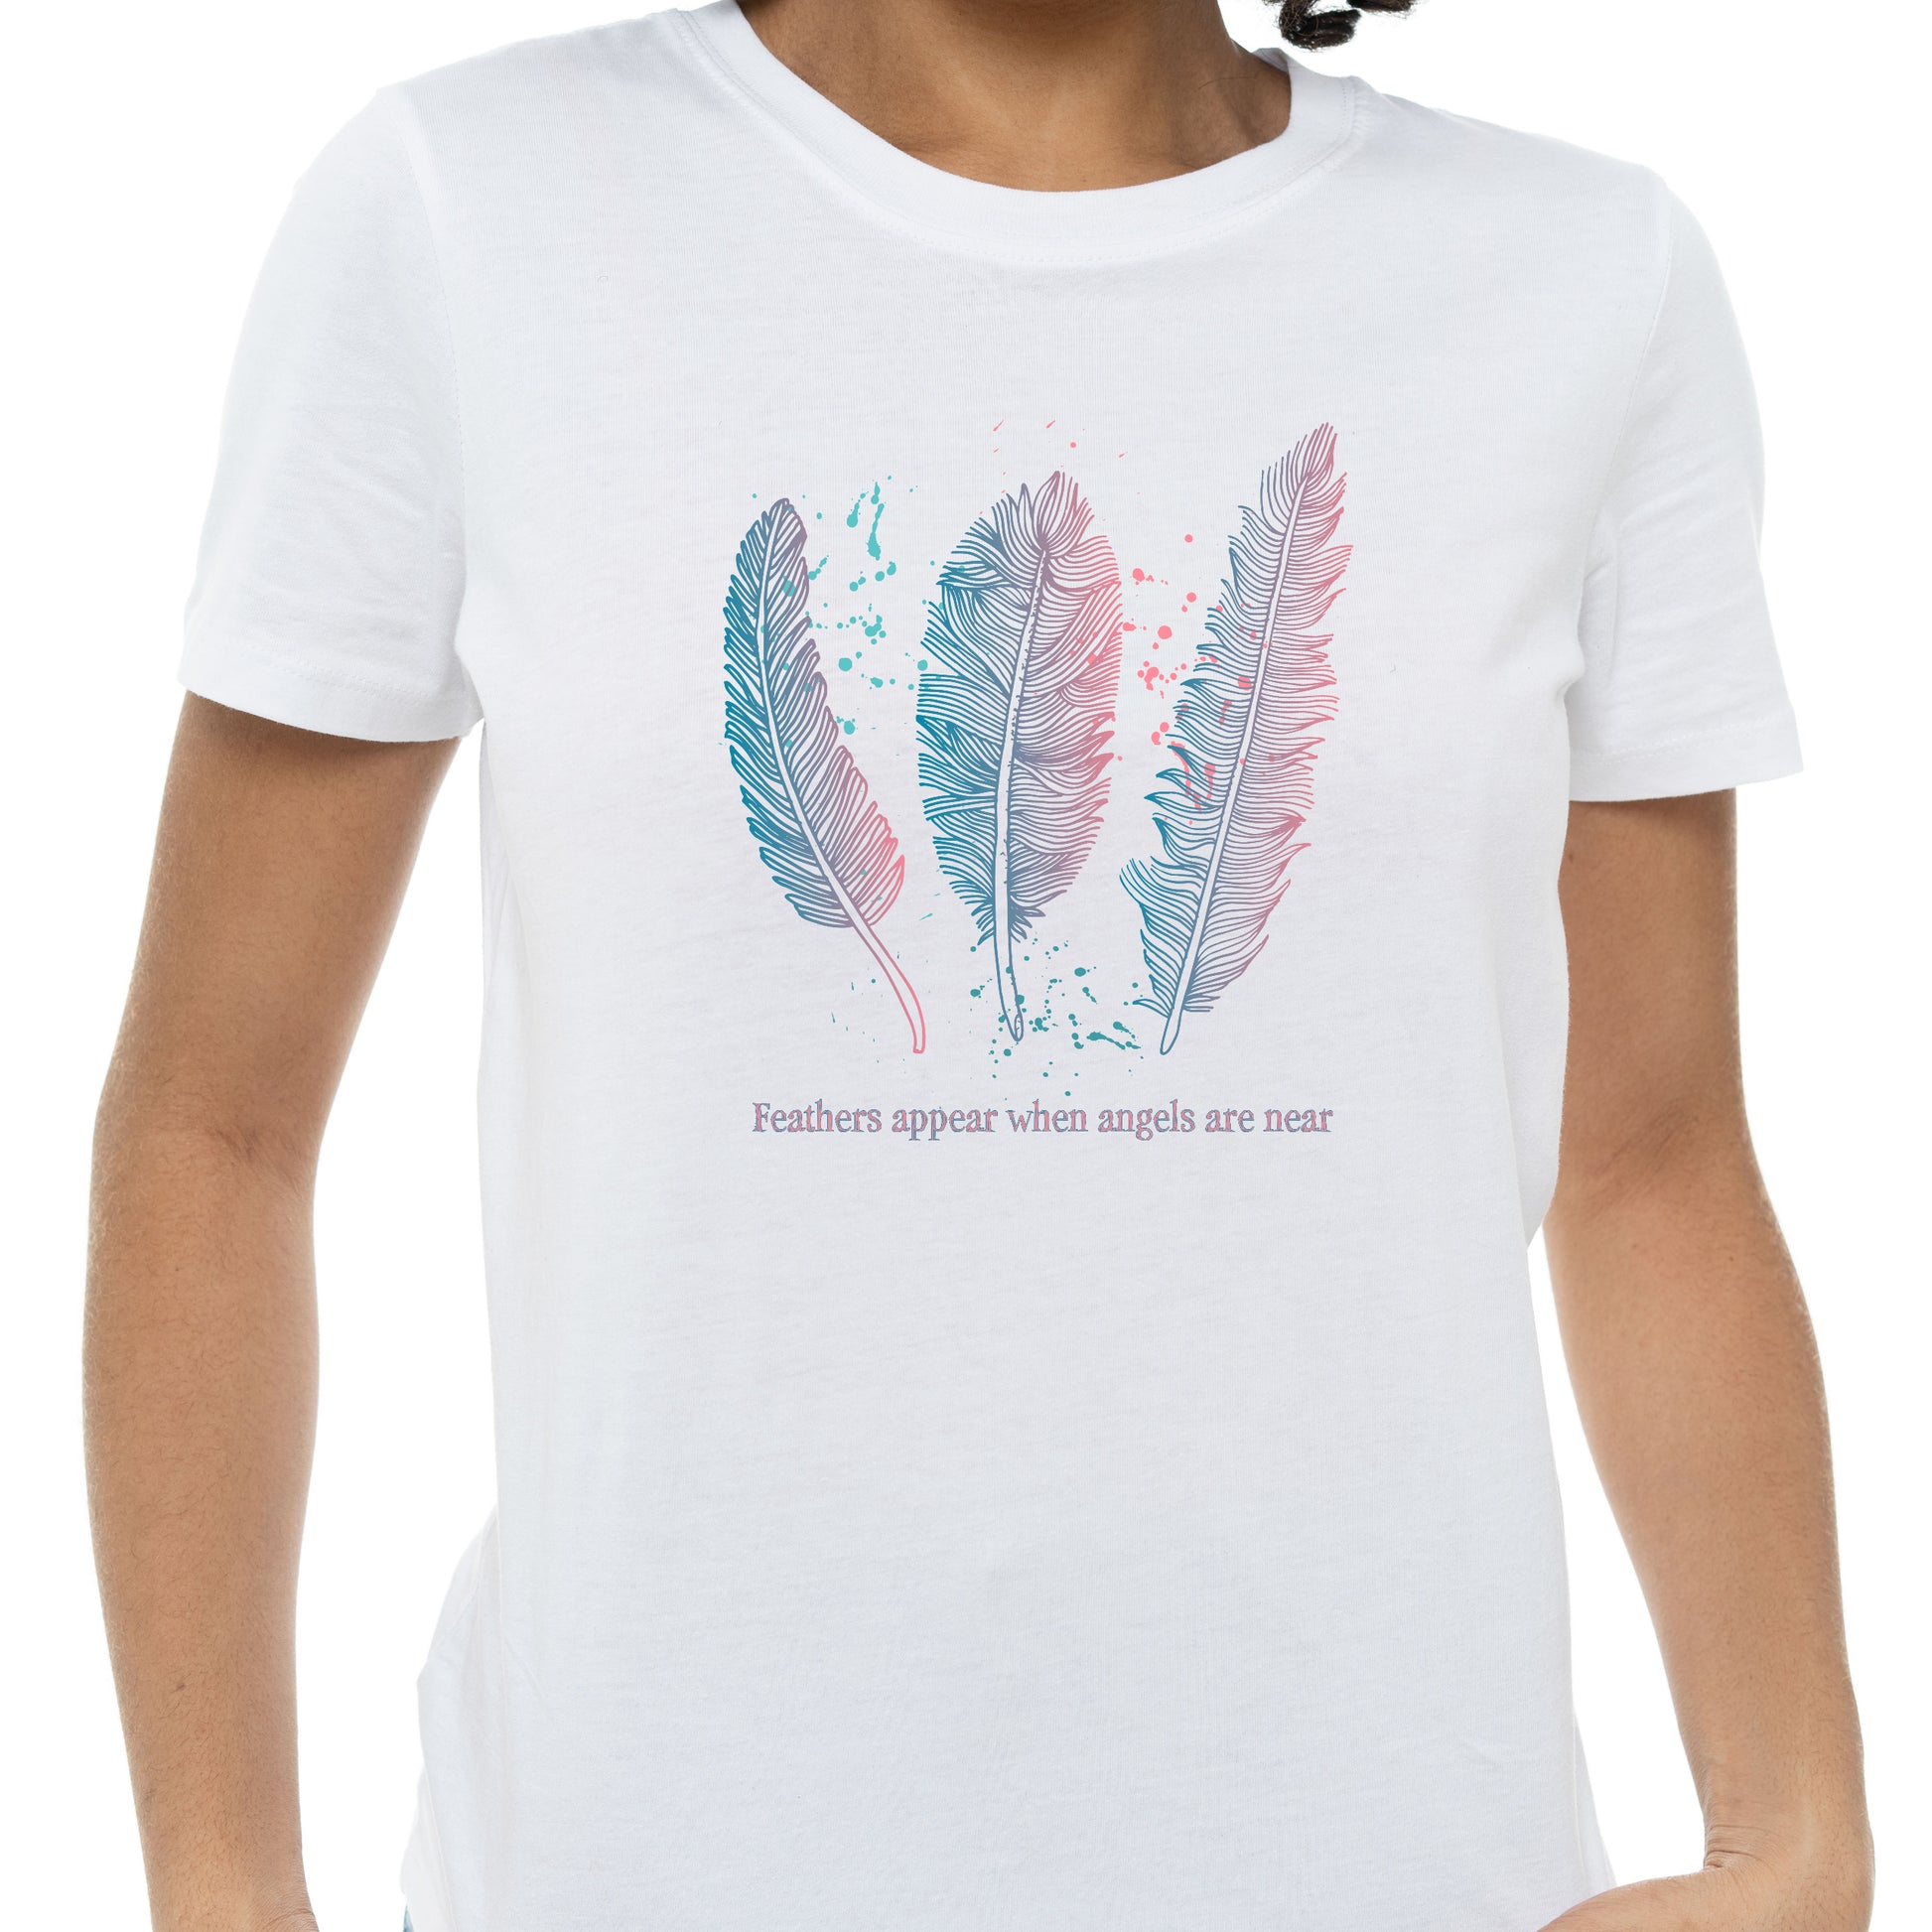 classic t-shirt featuring 3 pink and teal hand drawn feathers with text that reads Feathers appear when angels are near.